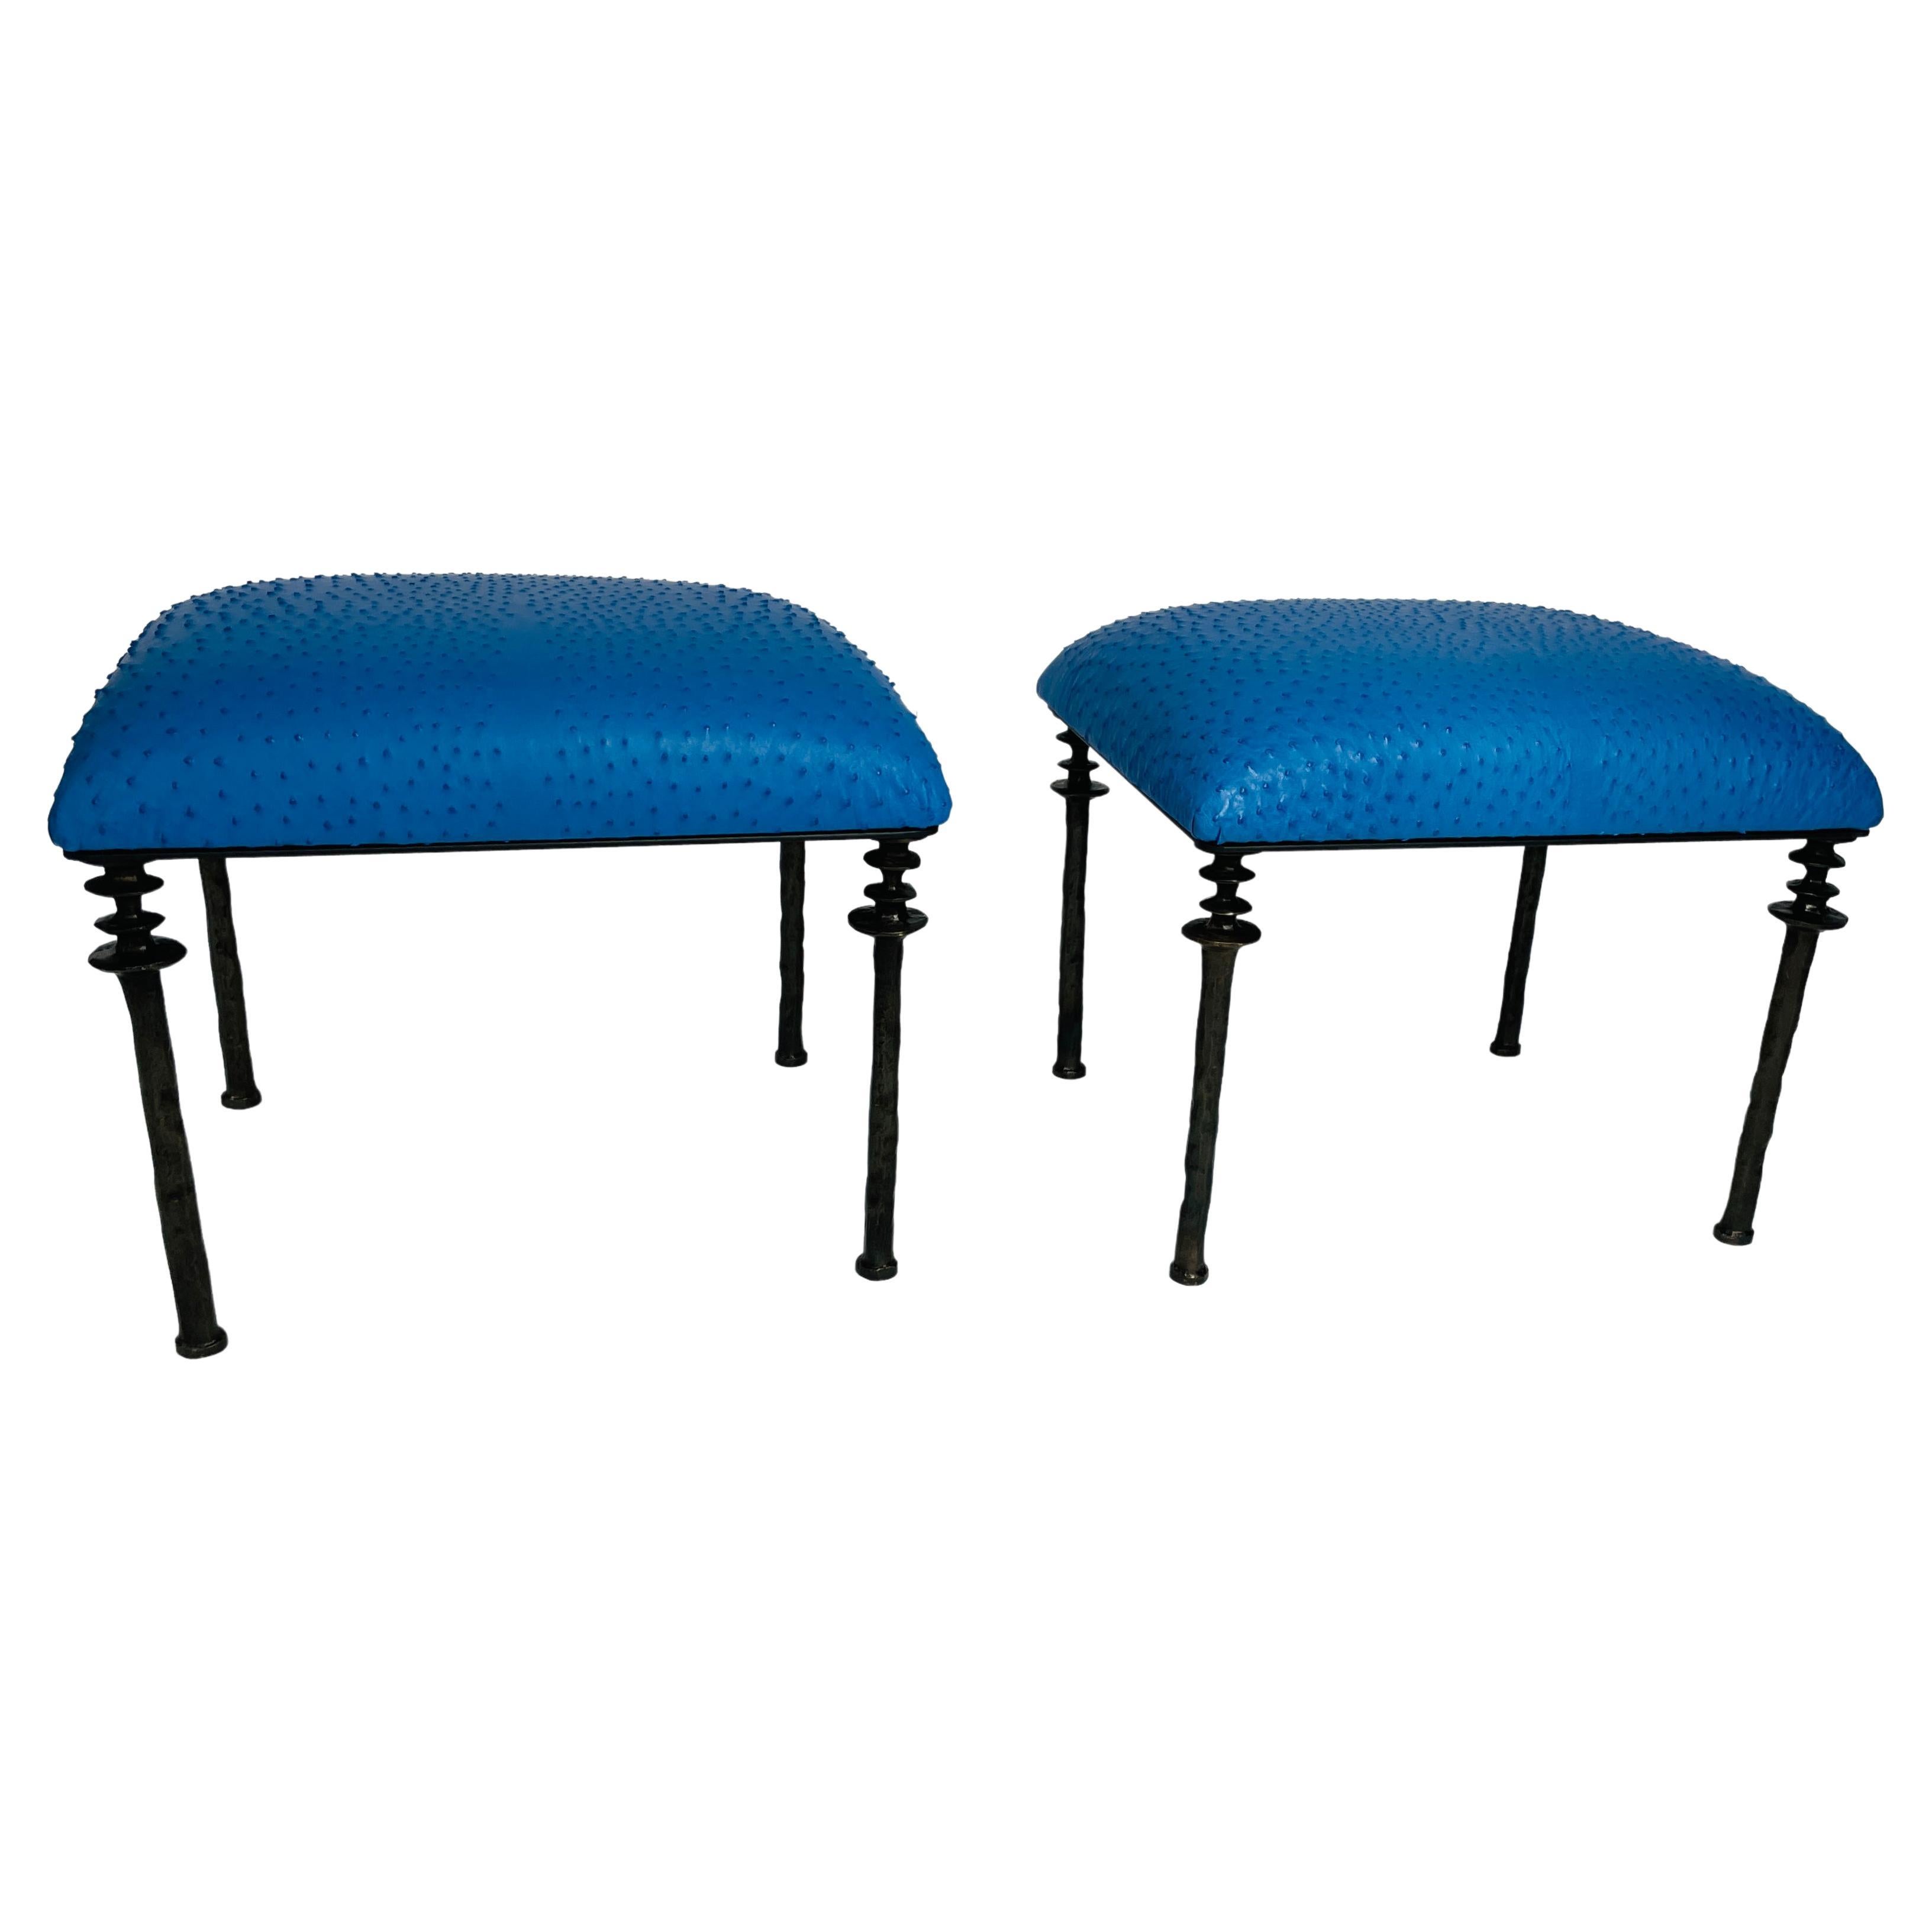 Pair of Sorgue Stools, by Bourgeois Boheme Atelier, Blue Ostrich Leather